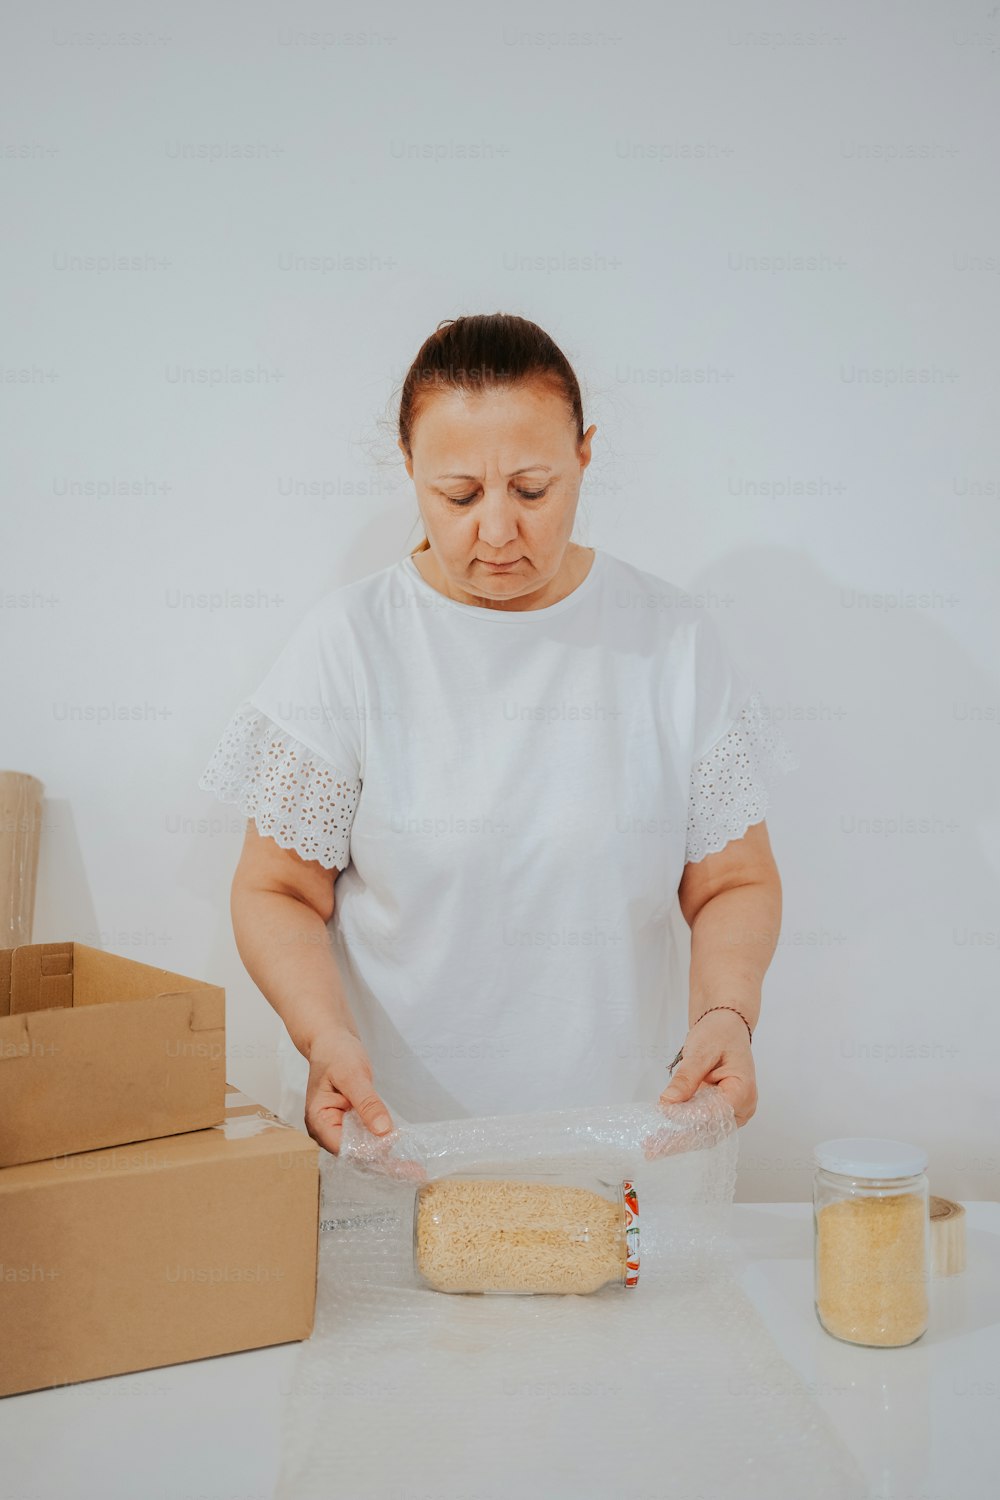 a woman in a white shirt is making a cake